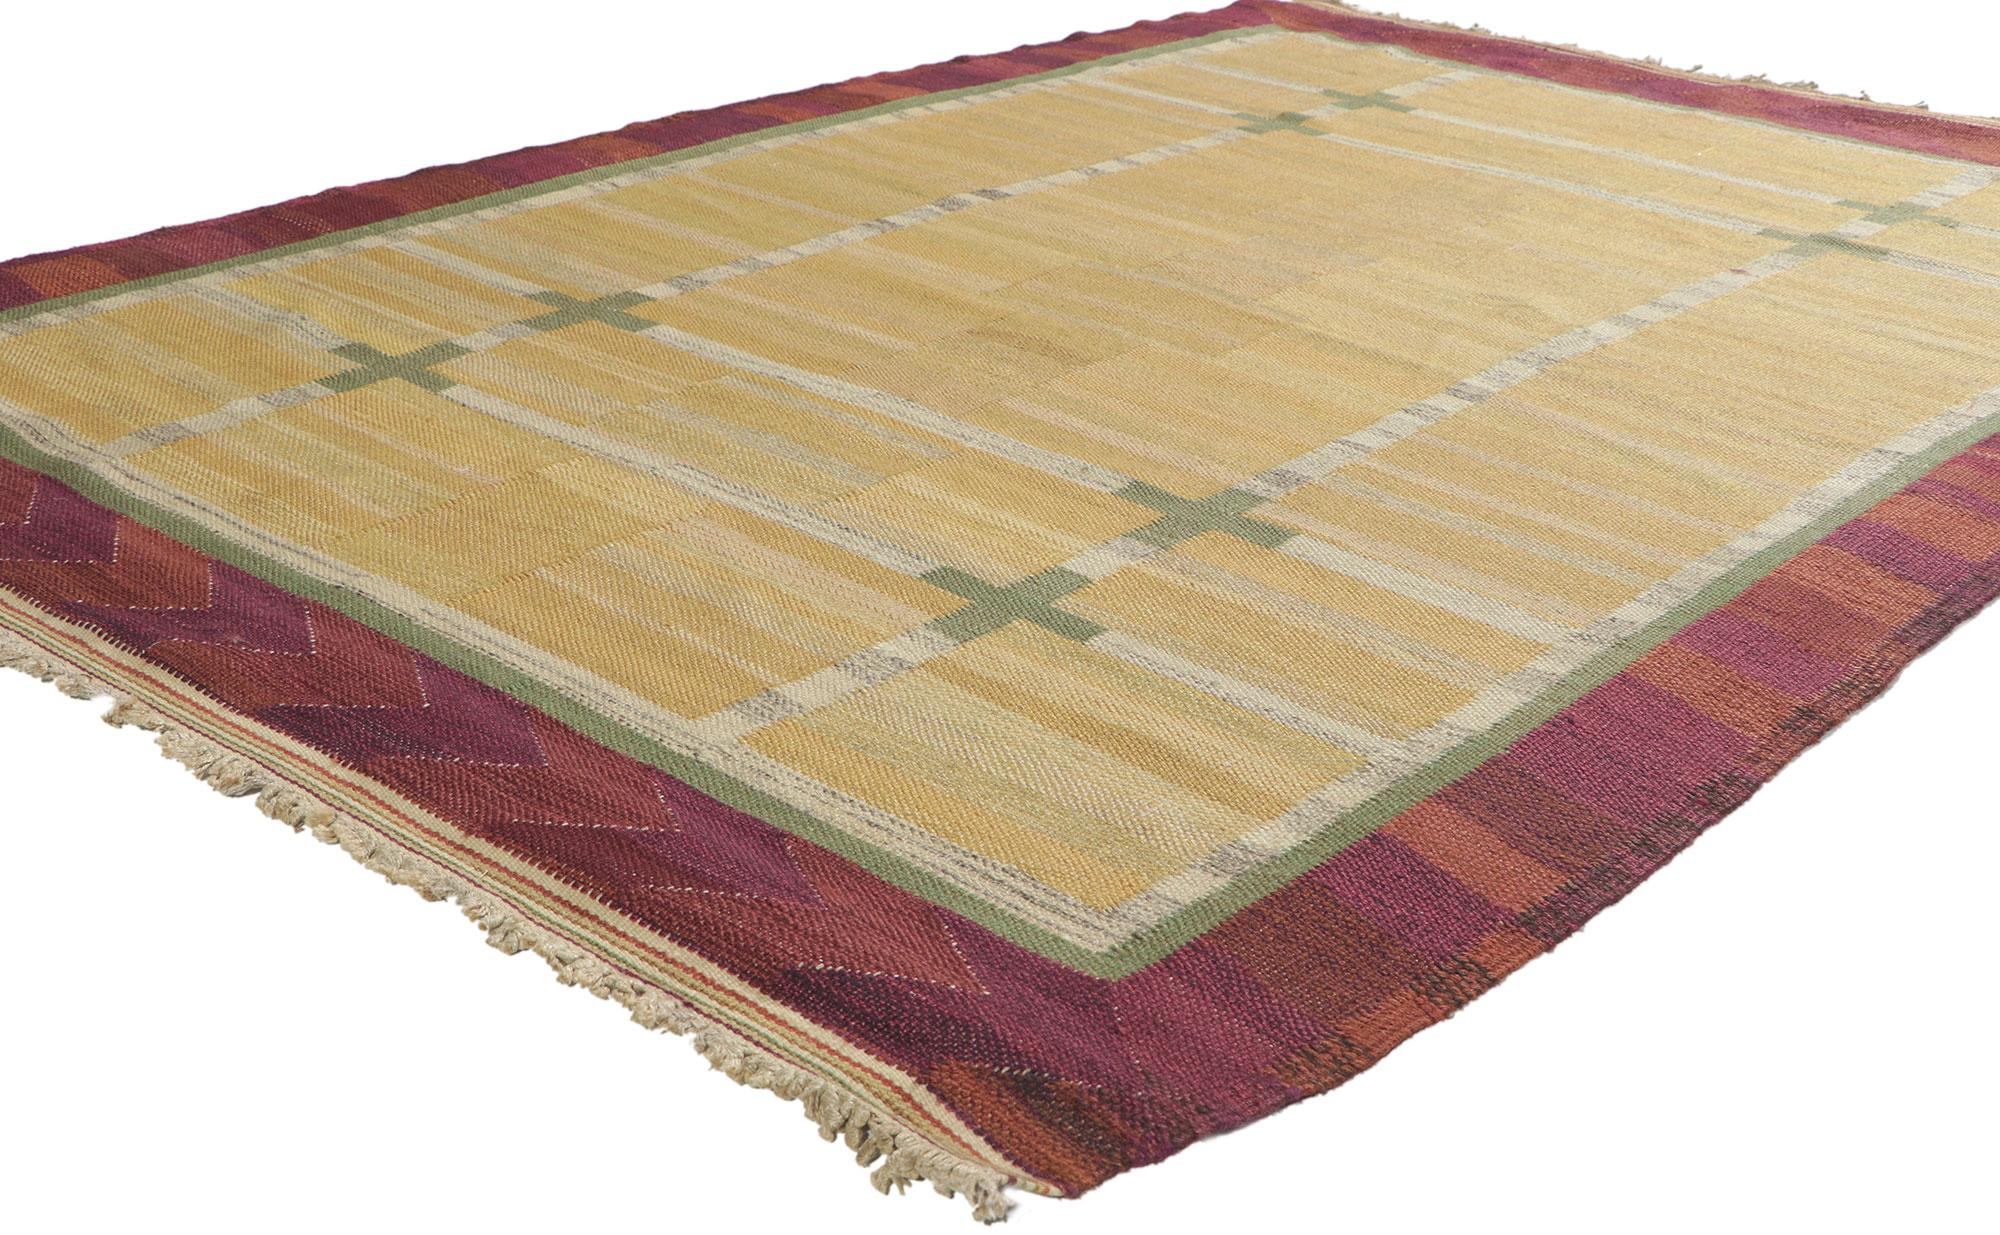 78488 Vintage Swedish Kilim Rollakan Rug, 04'07 x 06'09.
Emanating Scandinavian Modern design with incredible detail and texture, this handwoven Swedish rollakan rug is a captivating vision of woven beauty. The eye-catching geometric design and